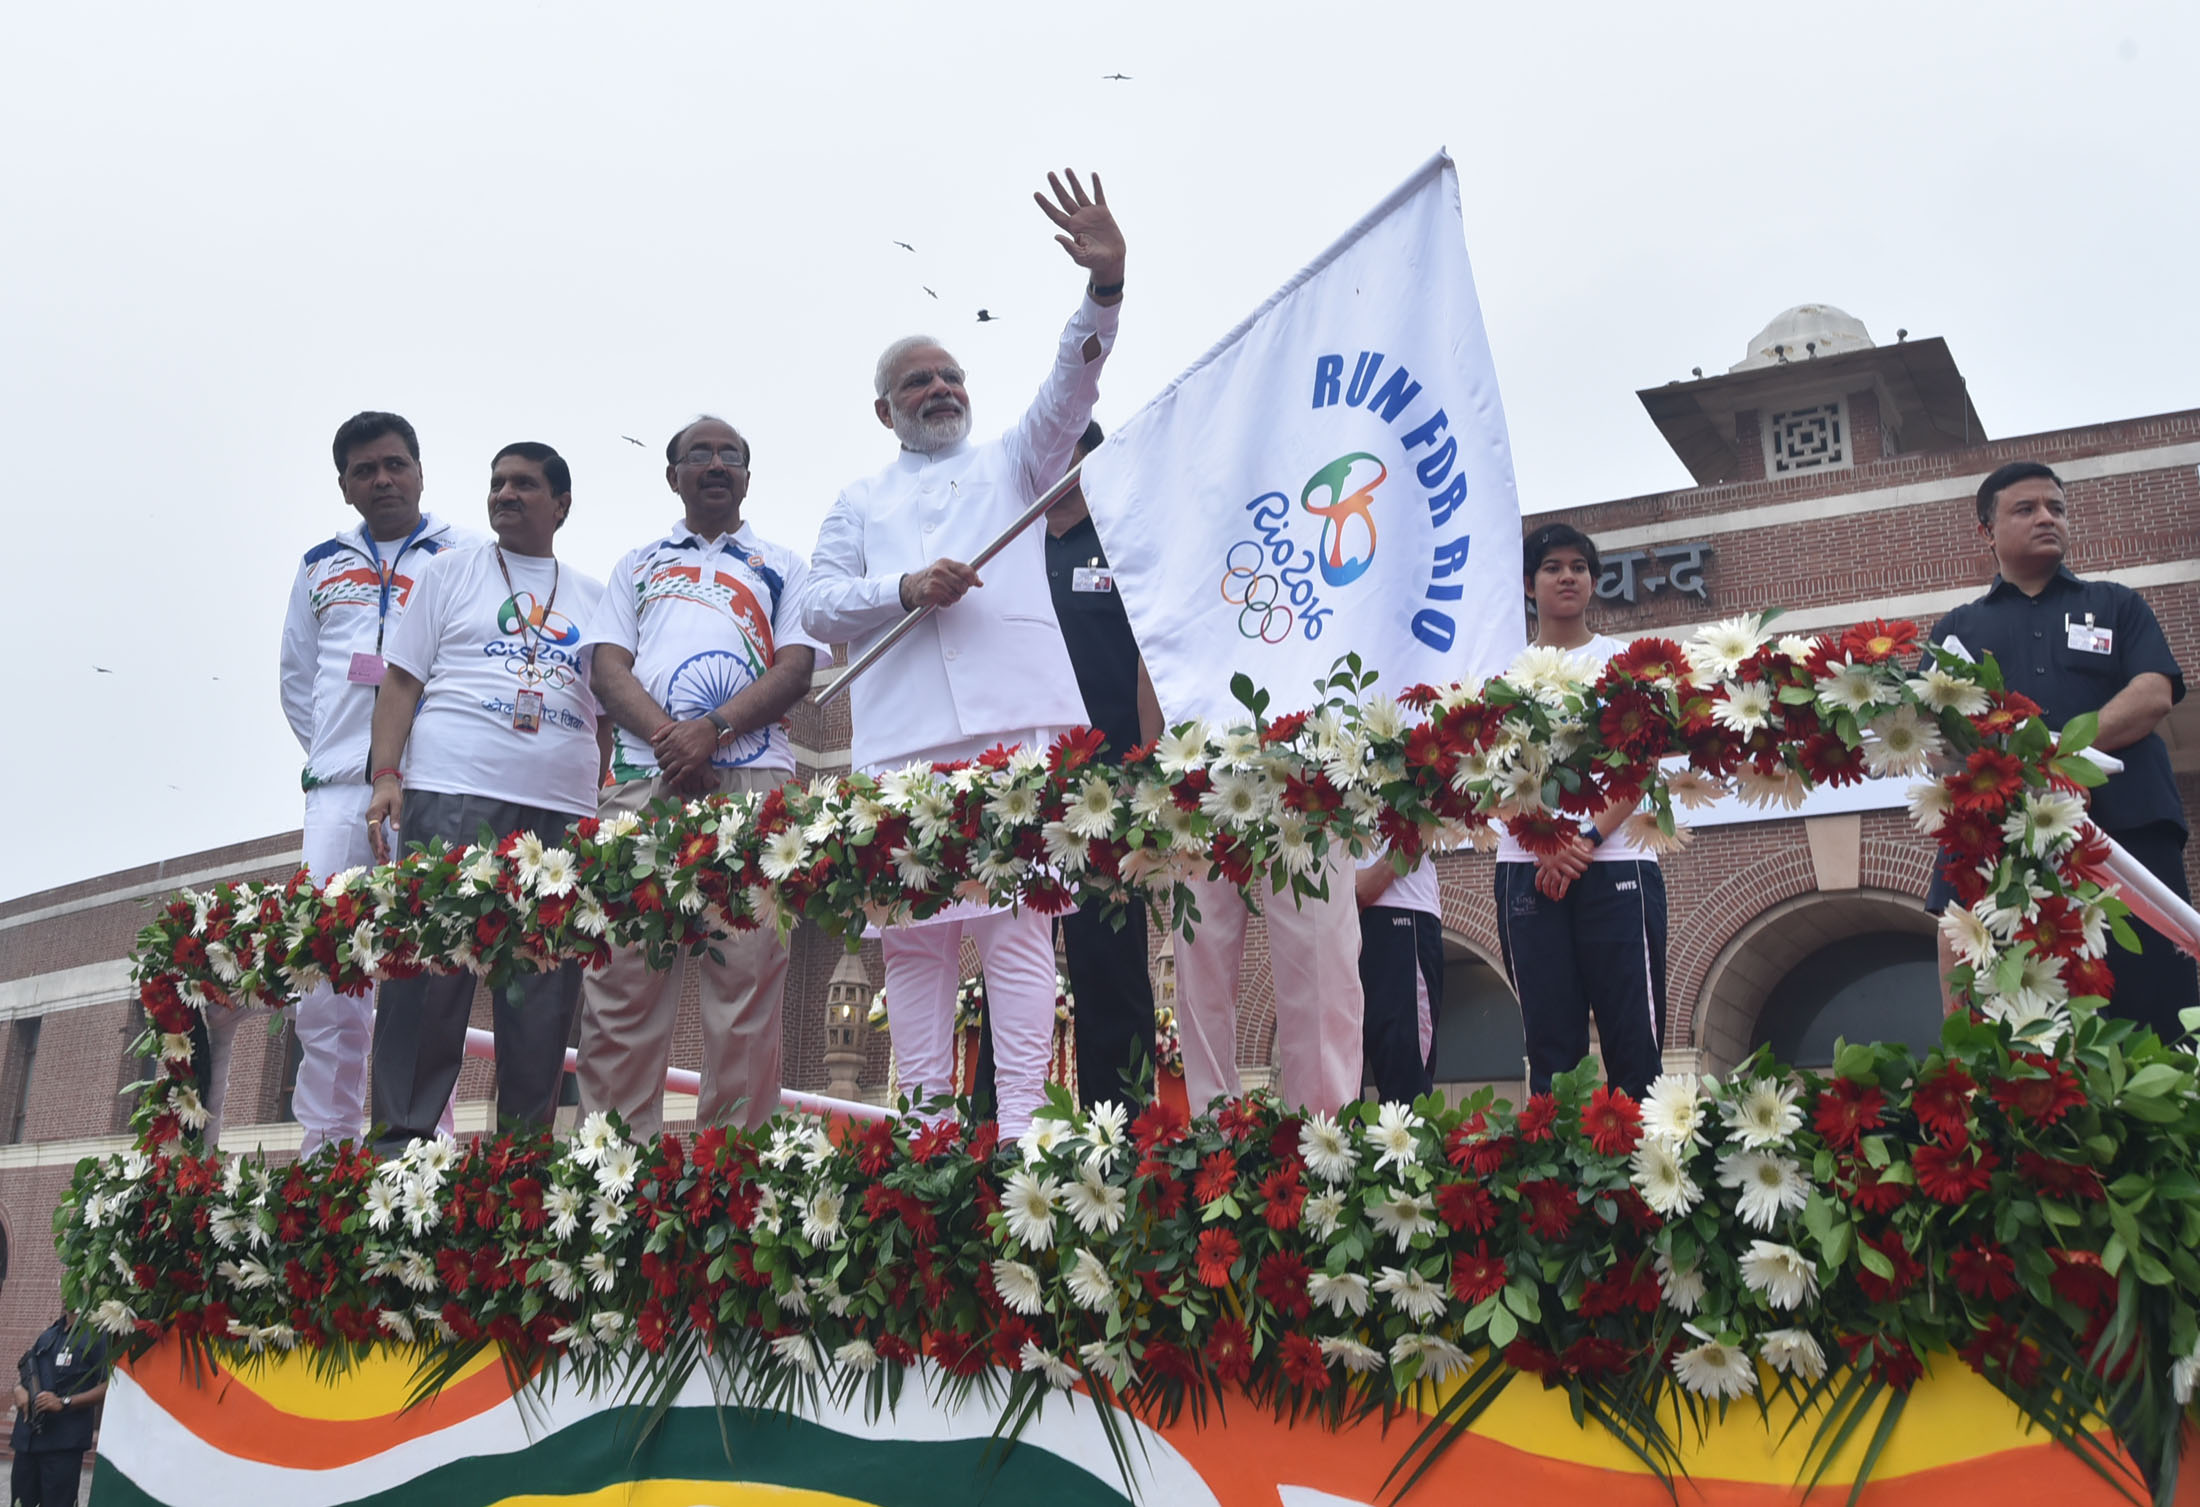 The Prime Minister, Shri Narendra Modi flagging off the “Run For Rio”, at Major Dhyan Chand National Stadium, in New Delhi on July 31, 2016. The Minister of State for Youth Affairs and Sports (I/C), Water Resources, River Development and Ganga Rejuvenation, Shri Vijay Goel is also seen.